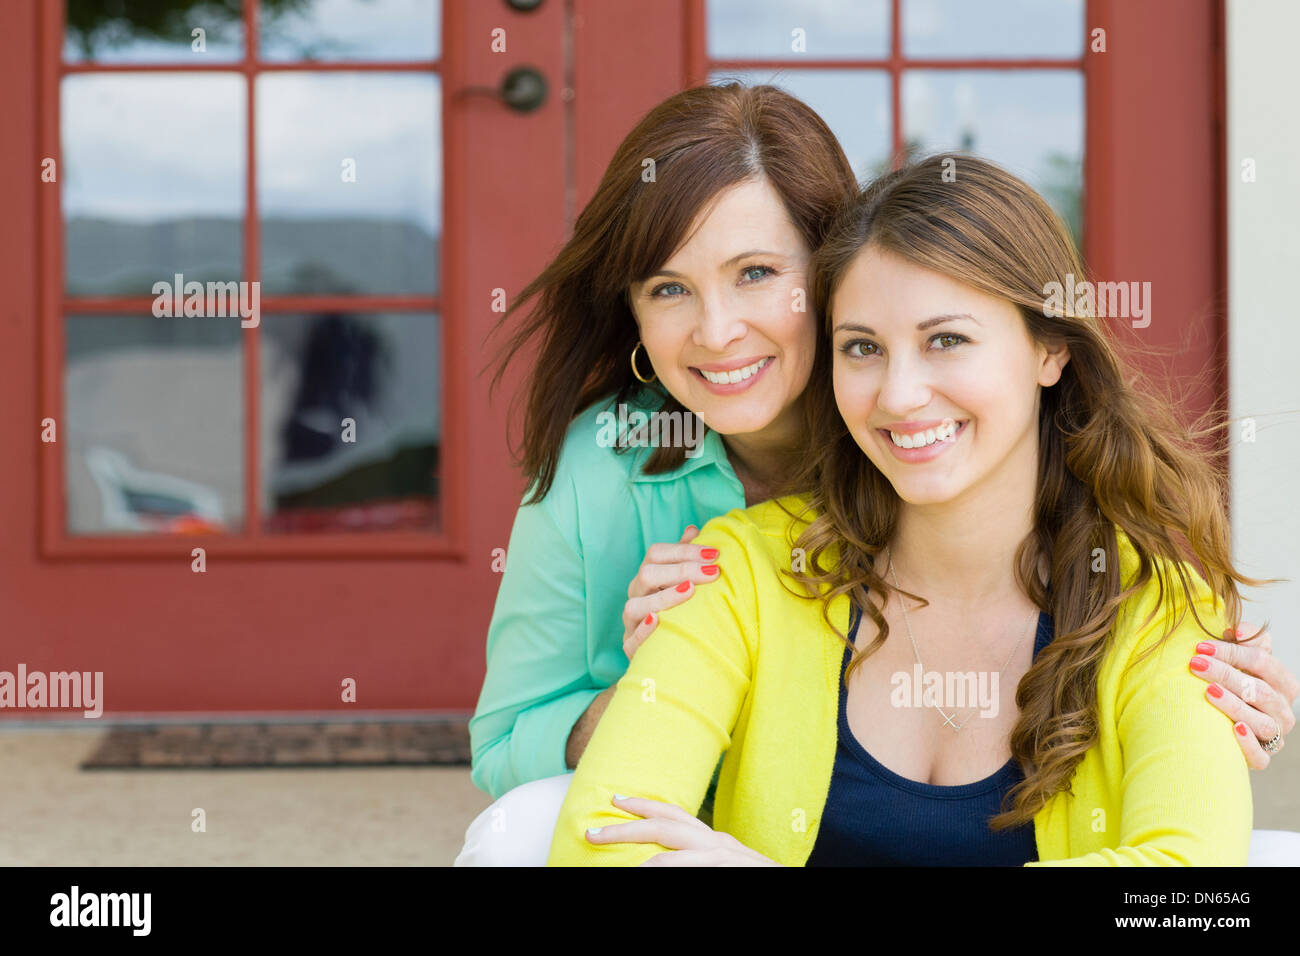 Caucasian mother and daughter smiling outdoors Stock Photo